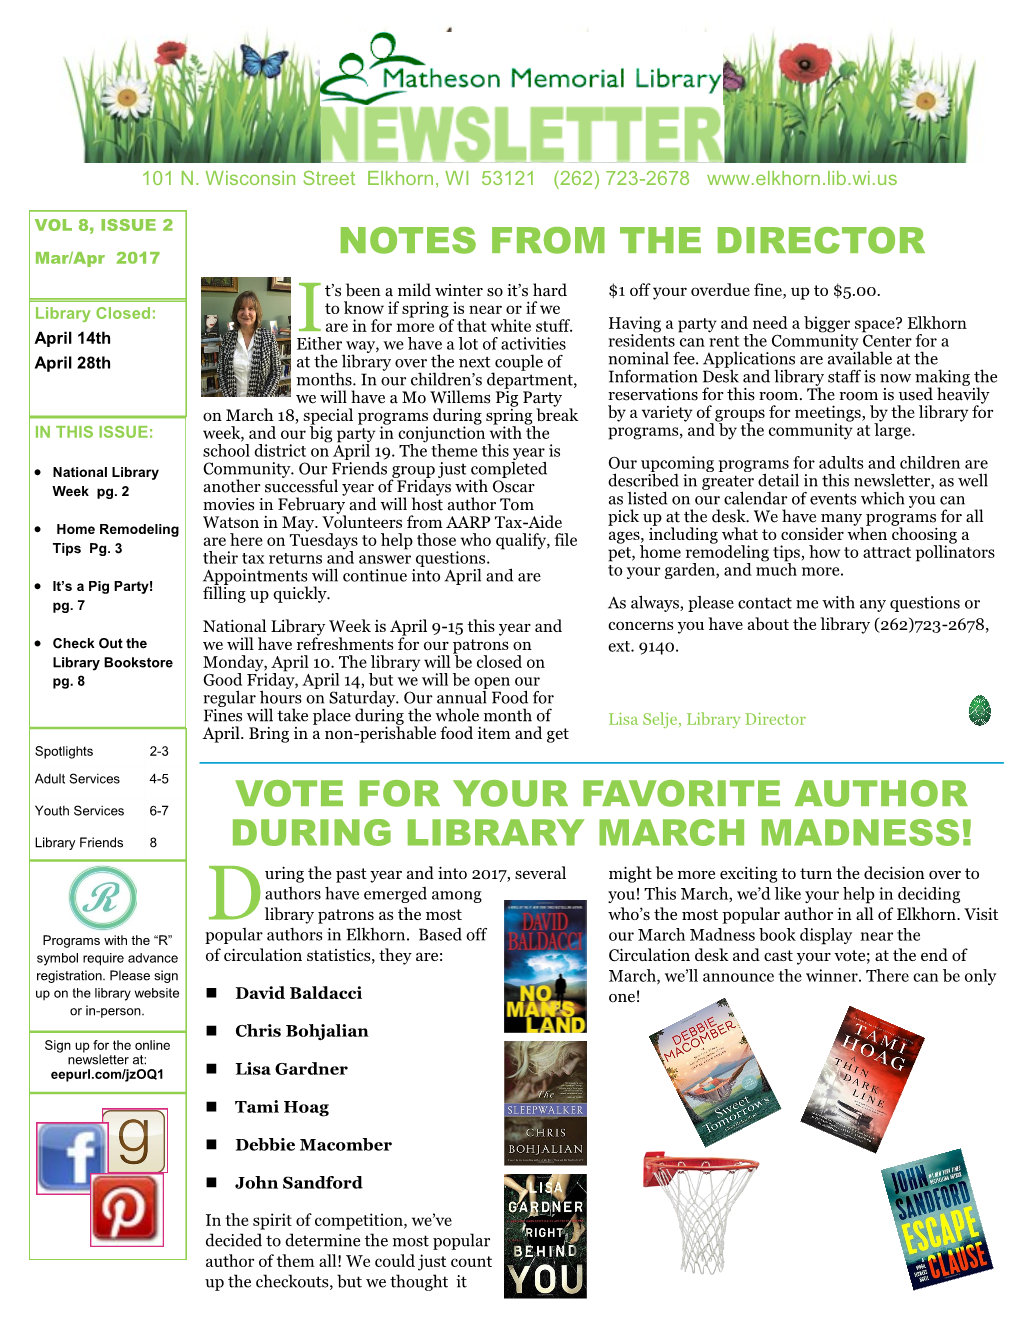 Notes from the Director Vote for Your Favorite Author